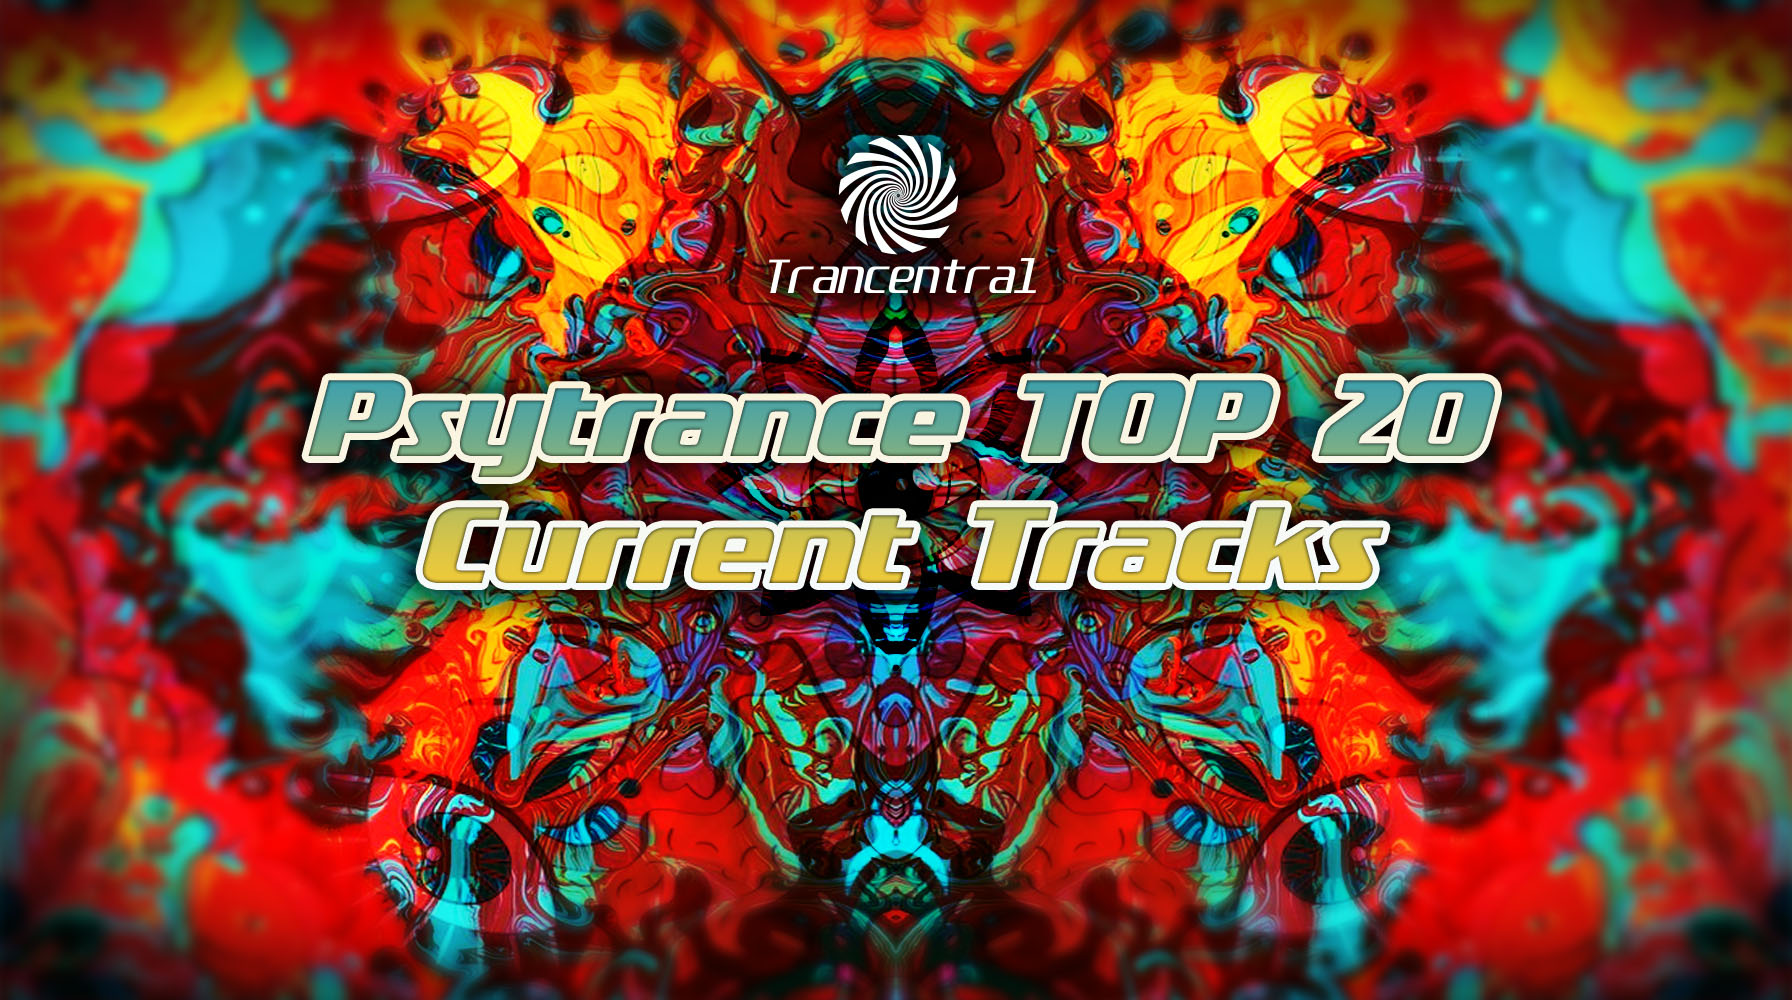 Psytrance top 20 current tracks </br> <small style='color: #fff'>Trancentral top 20 Psytrance chart is based on views of the tracks across YouTube. Click on each track to listen to it!</small>